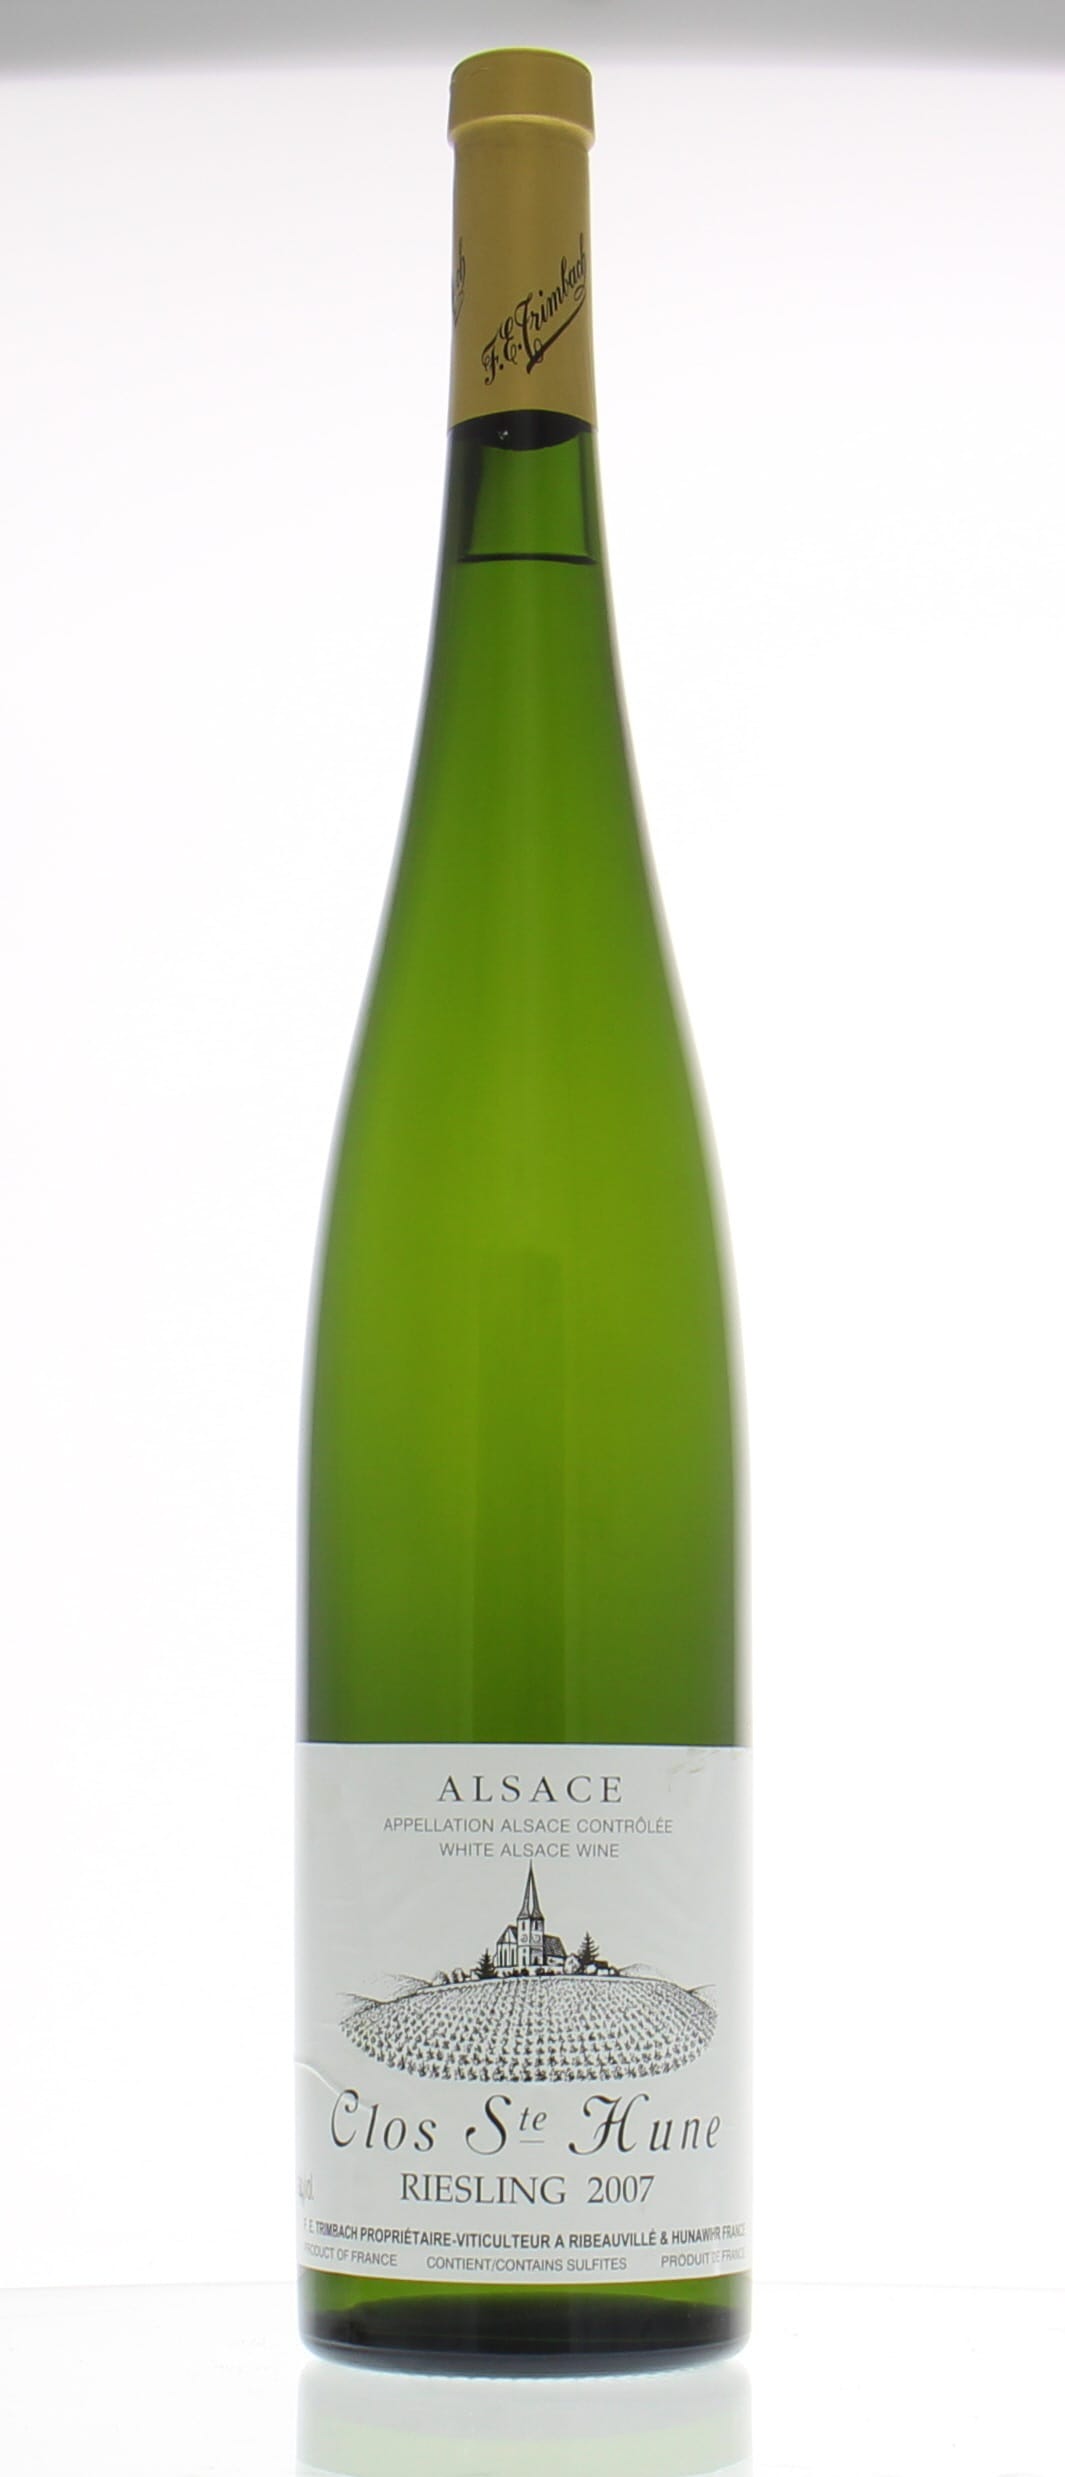 Trimbach - Riesling Clos St Hune 2007